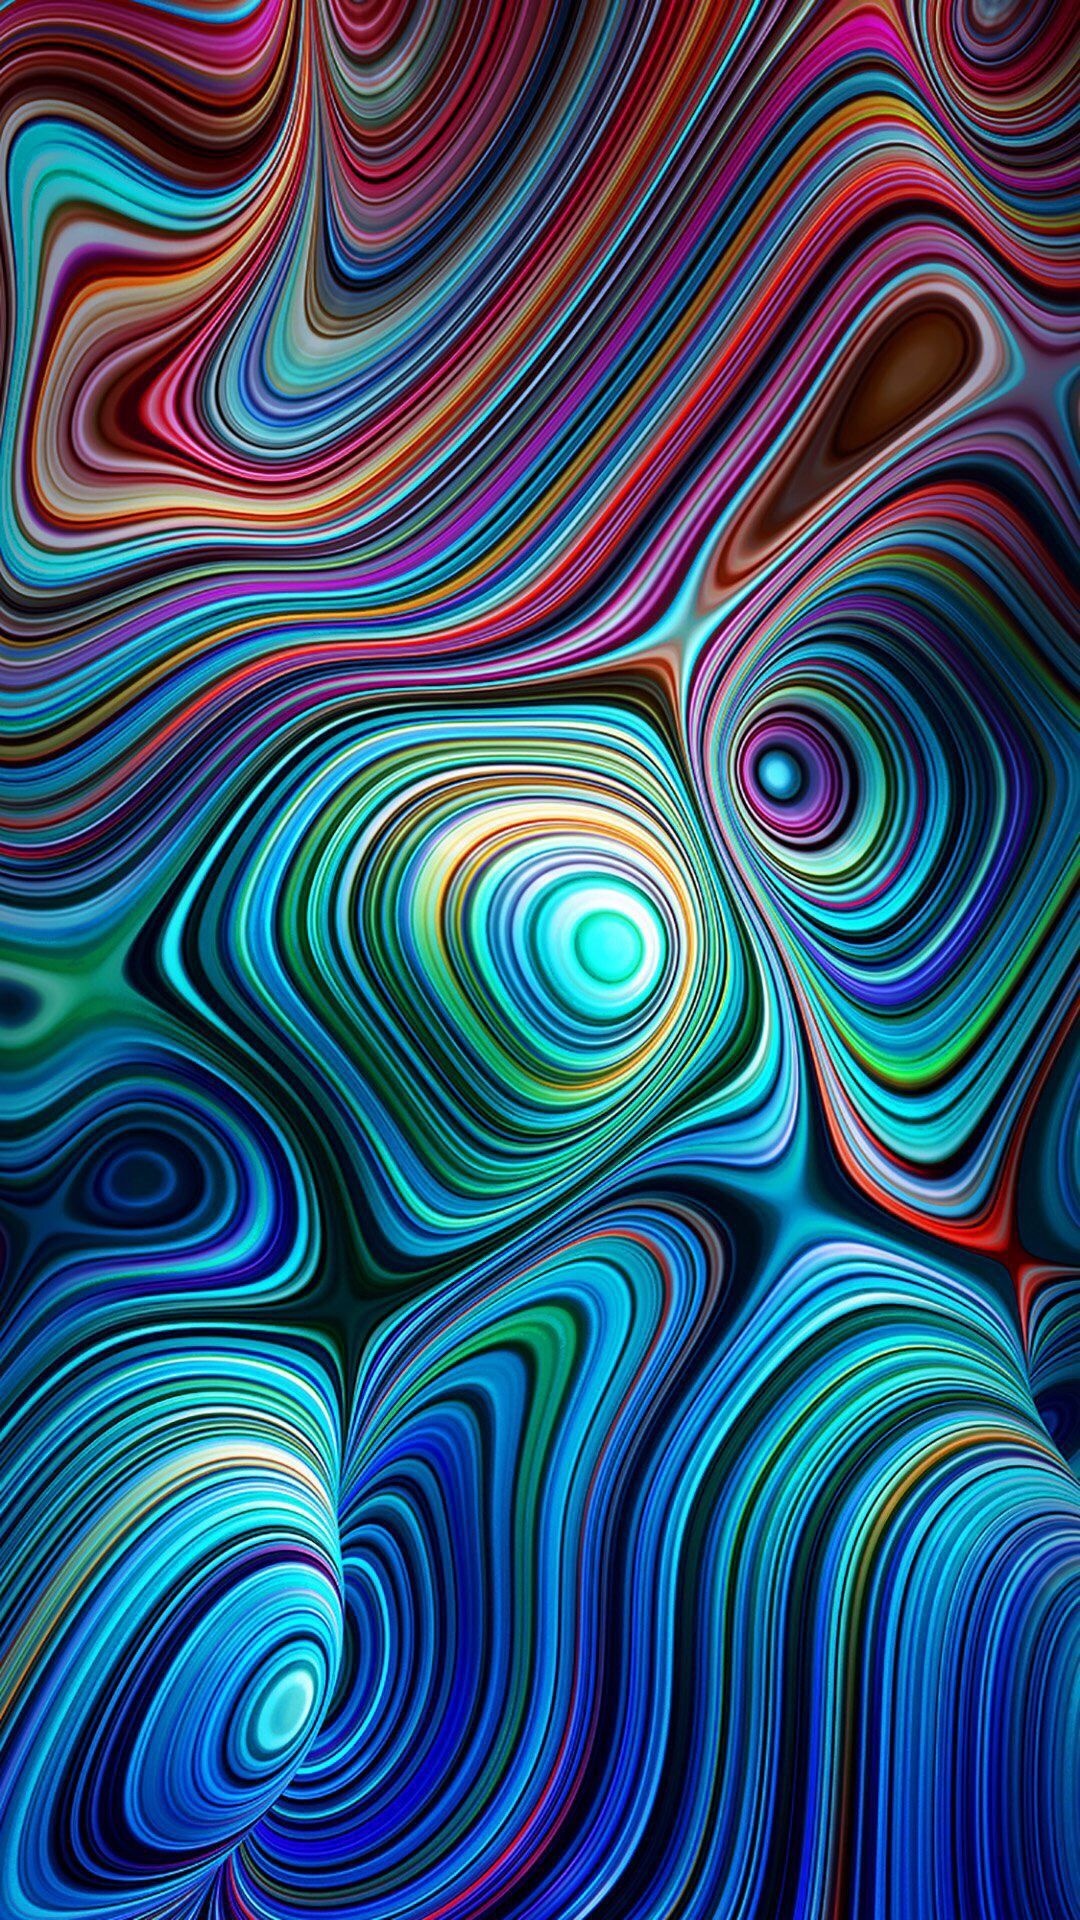 Colorful phone wallpapers, Eye-catching patterns, 1080x1920 Full HD Phone